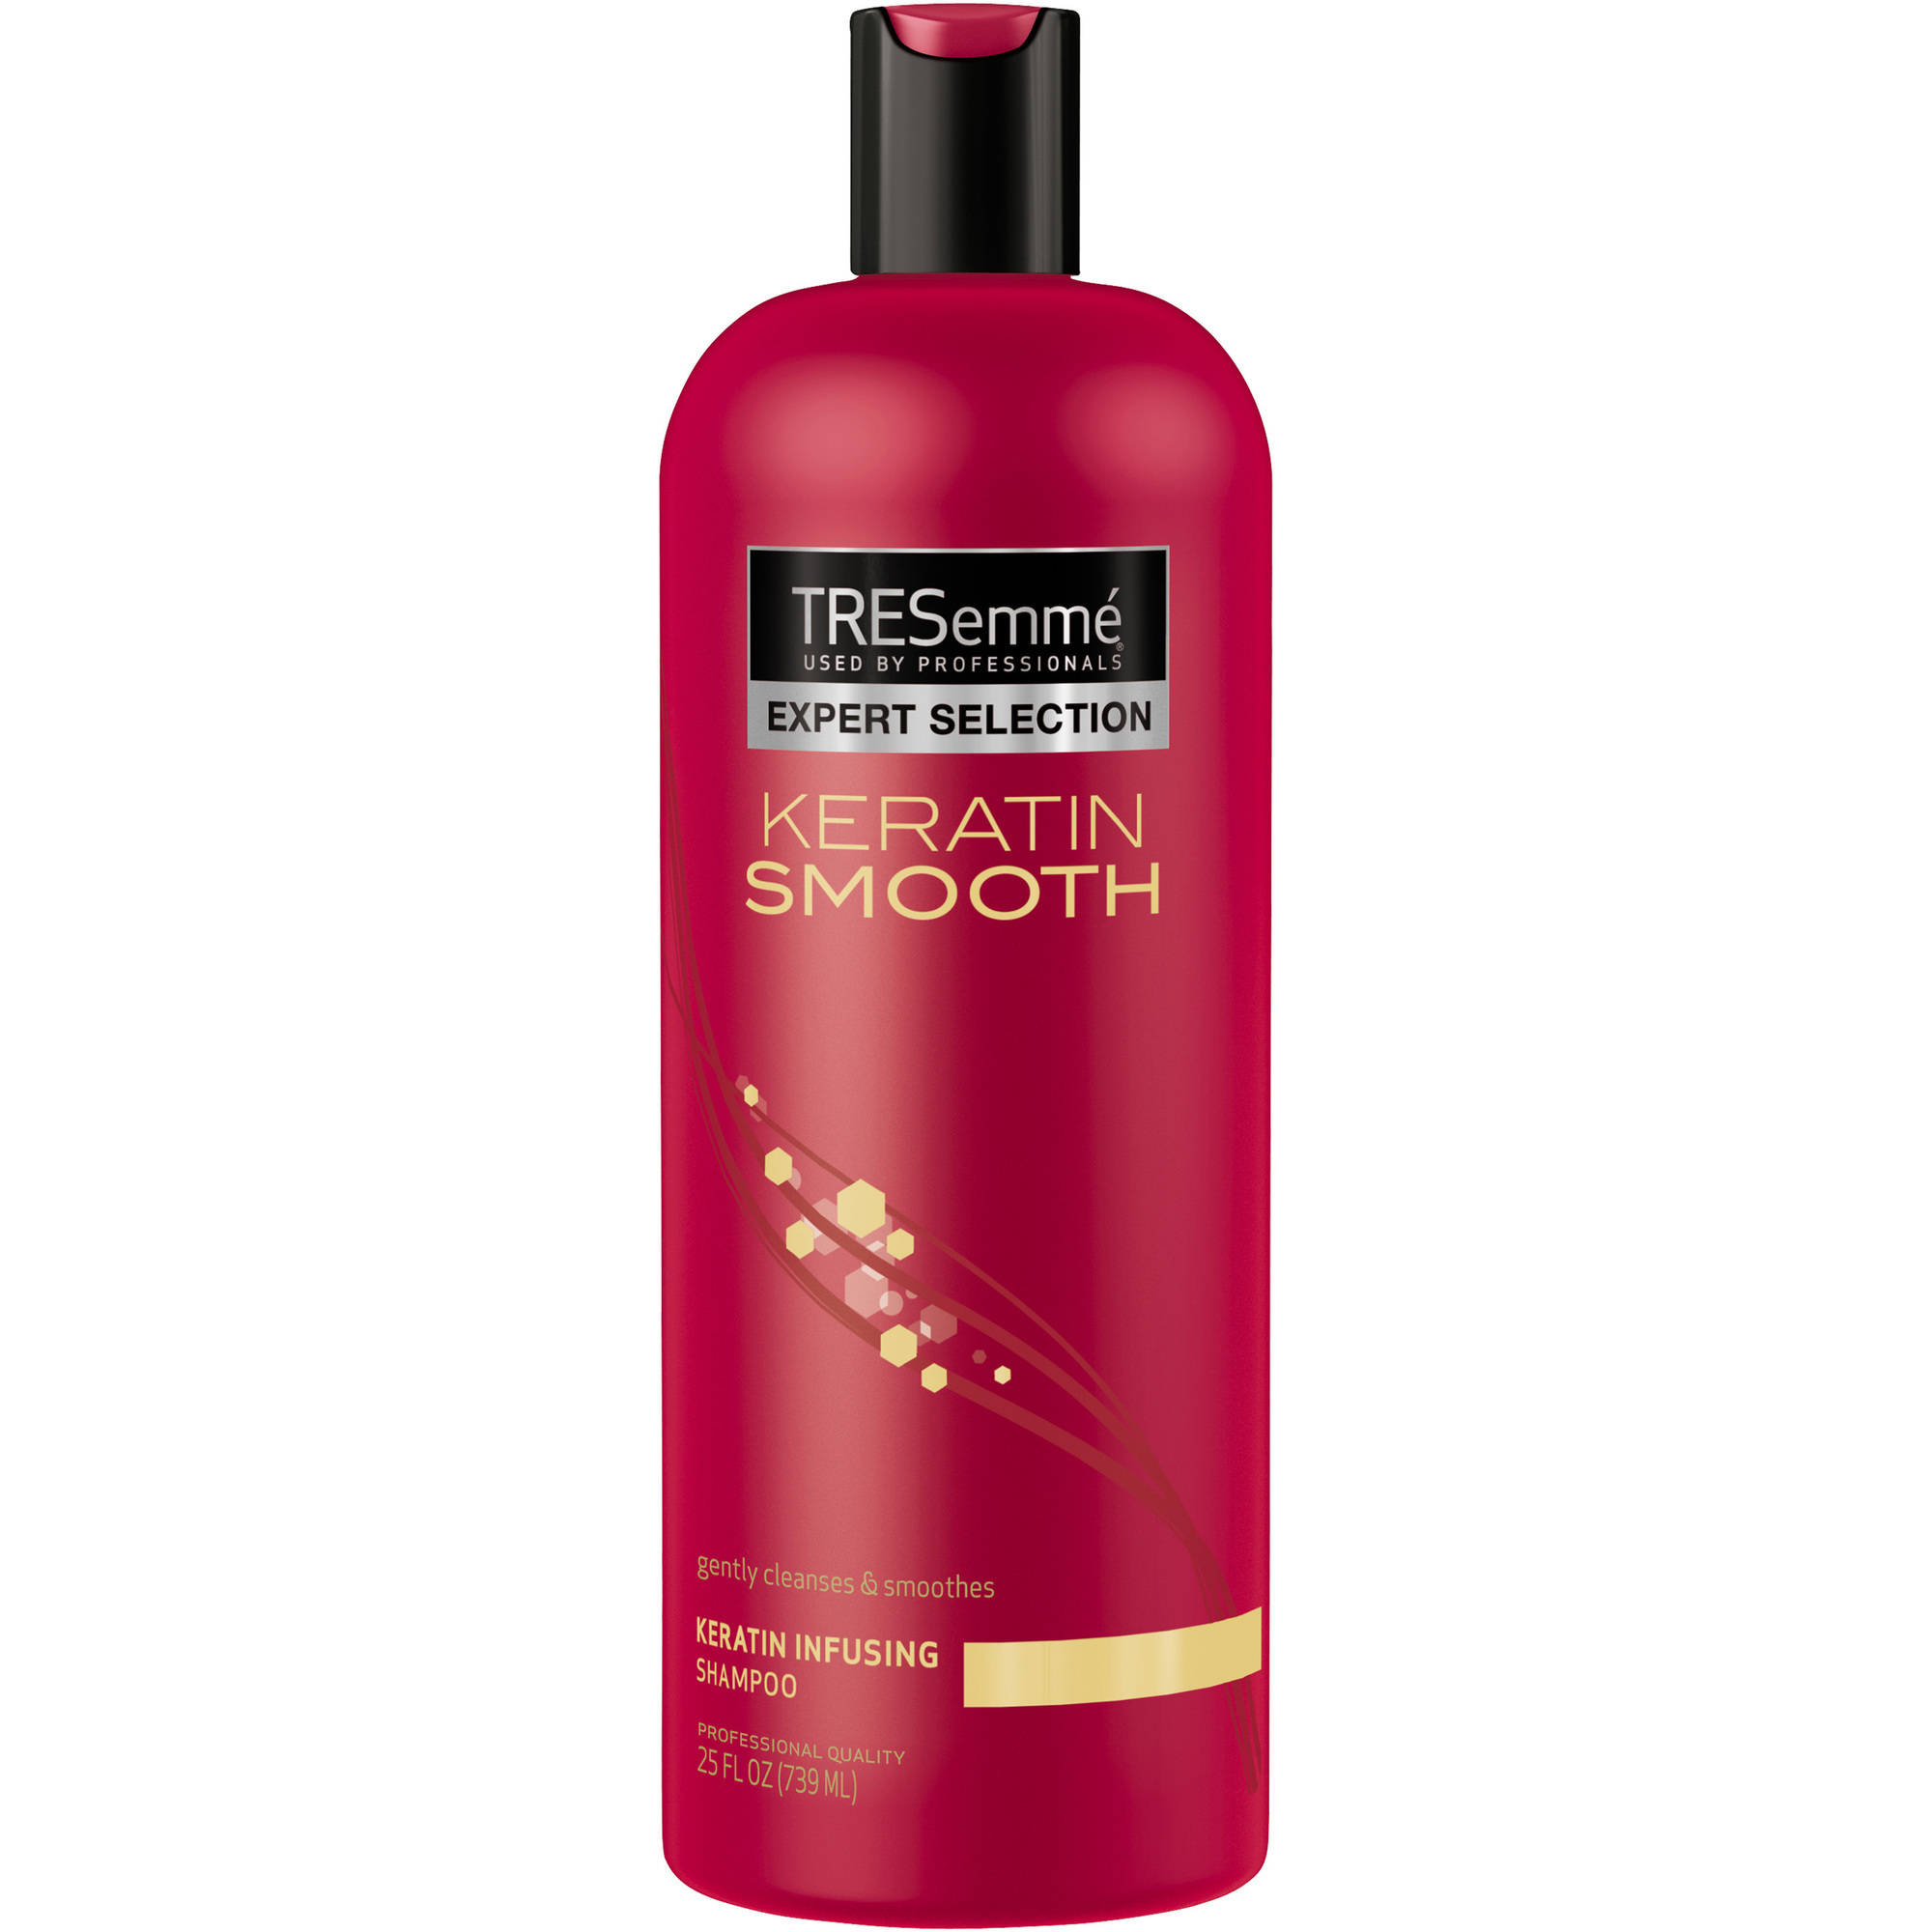 cismis TREsemme Keratin Smooth Shampoo - Top 5 Shampoos for Chemically Treated & Colored Hair- Reviews & Price